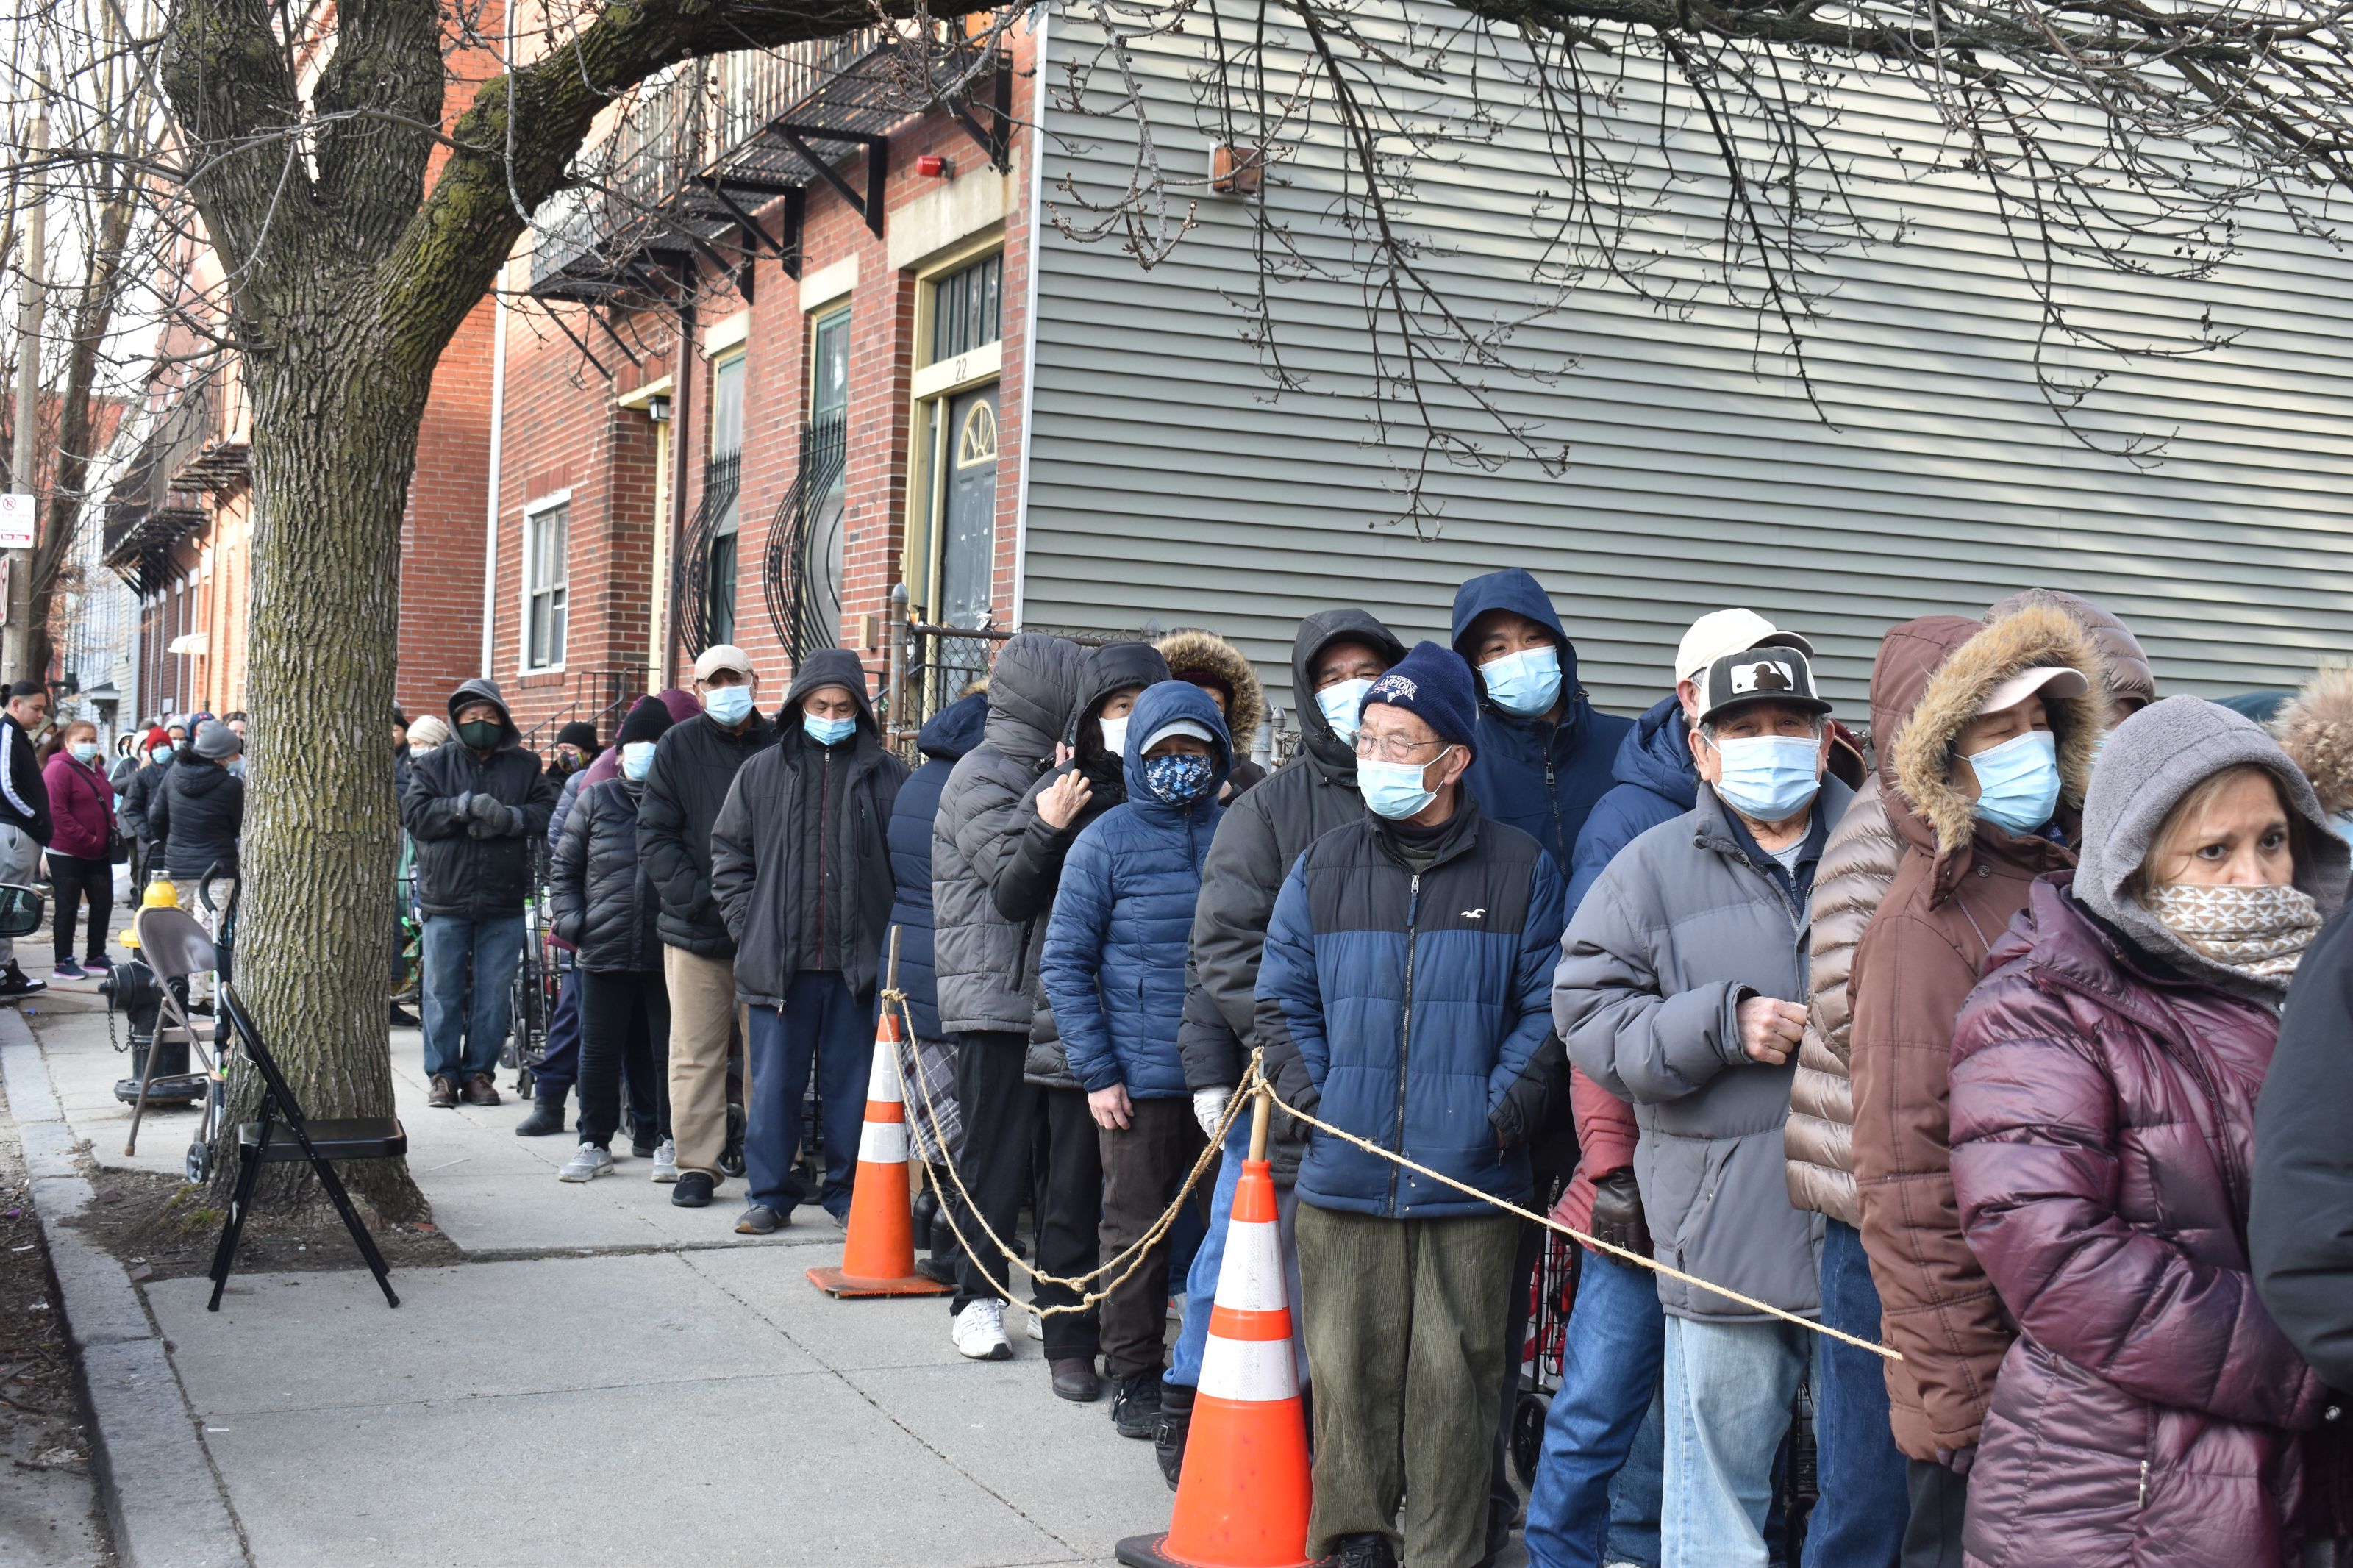 Every Tuesday morning, starting as early as 5:00 a.m., a line begins to form in East Boston in front of the East Boston Community Soup Kitchen. For this multi-lingual community of first, and second, generation immigrants the COVID pandemic has uniquely impacted the levels of employment and available support.